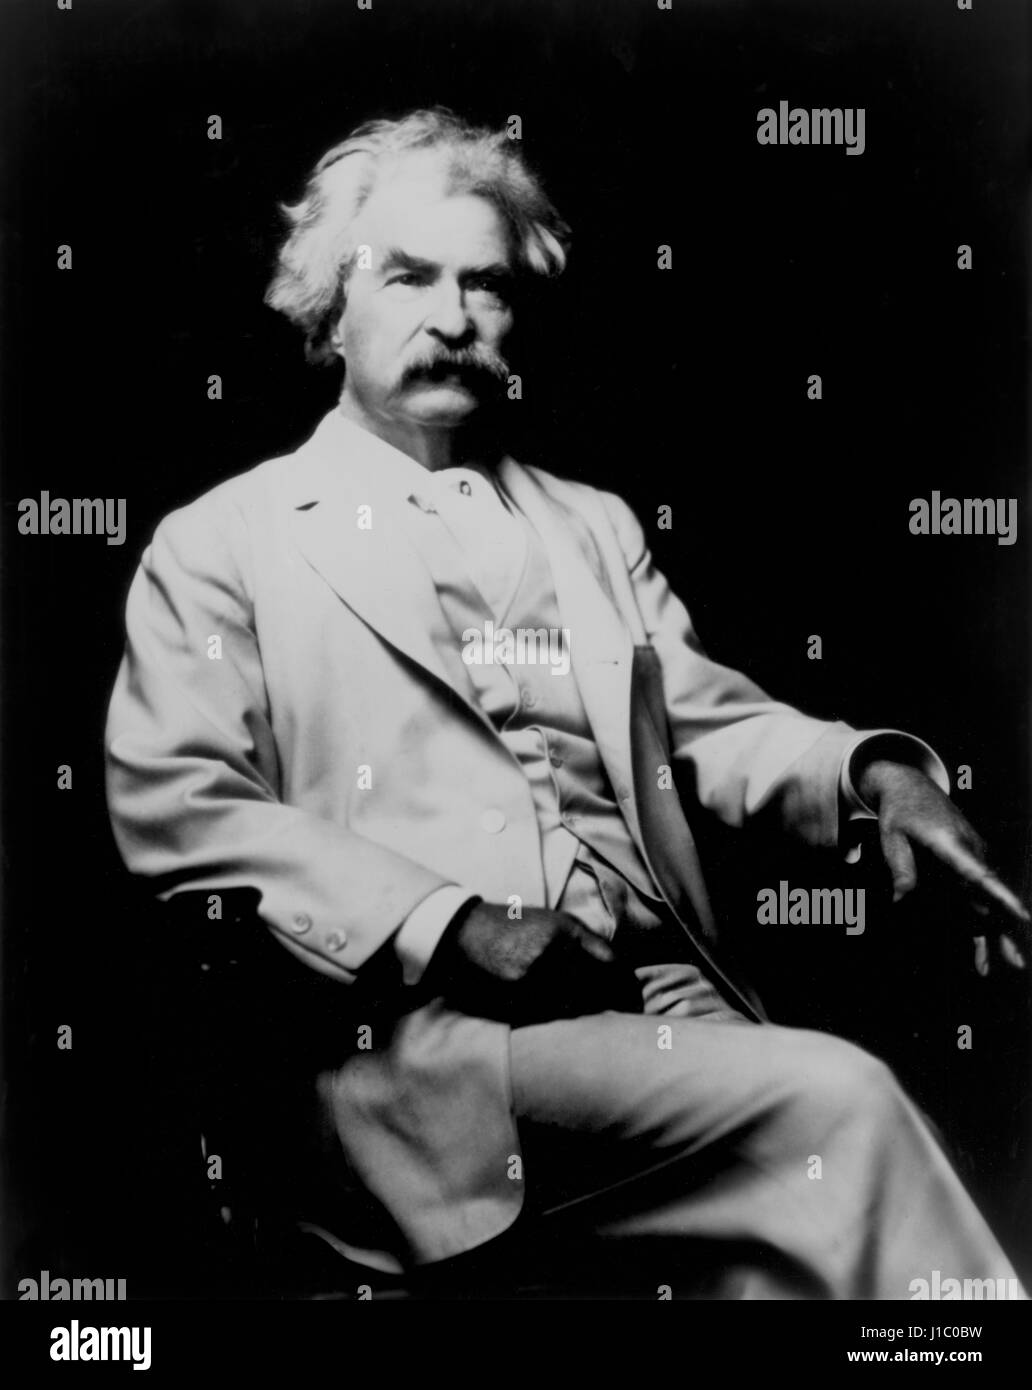 Samuel Langhorne Clemens, or better known as Mark Twain (1835-1910), American Writer and Humorist, Portrait, early 1900's Stock Photo